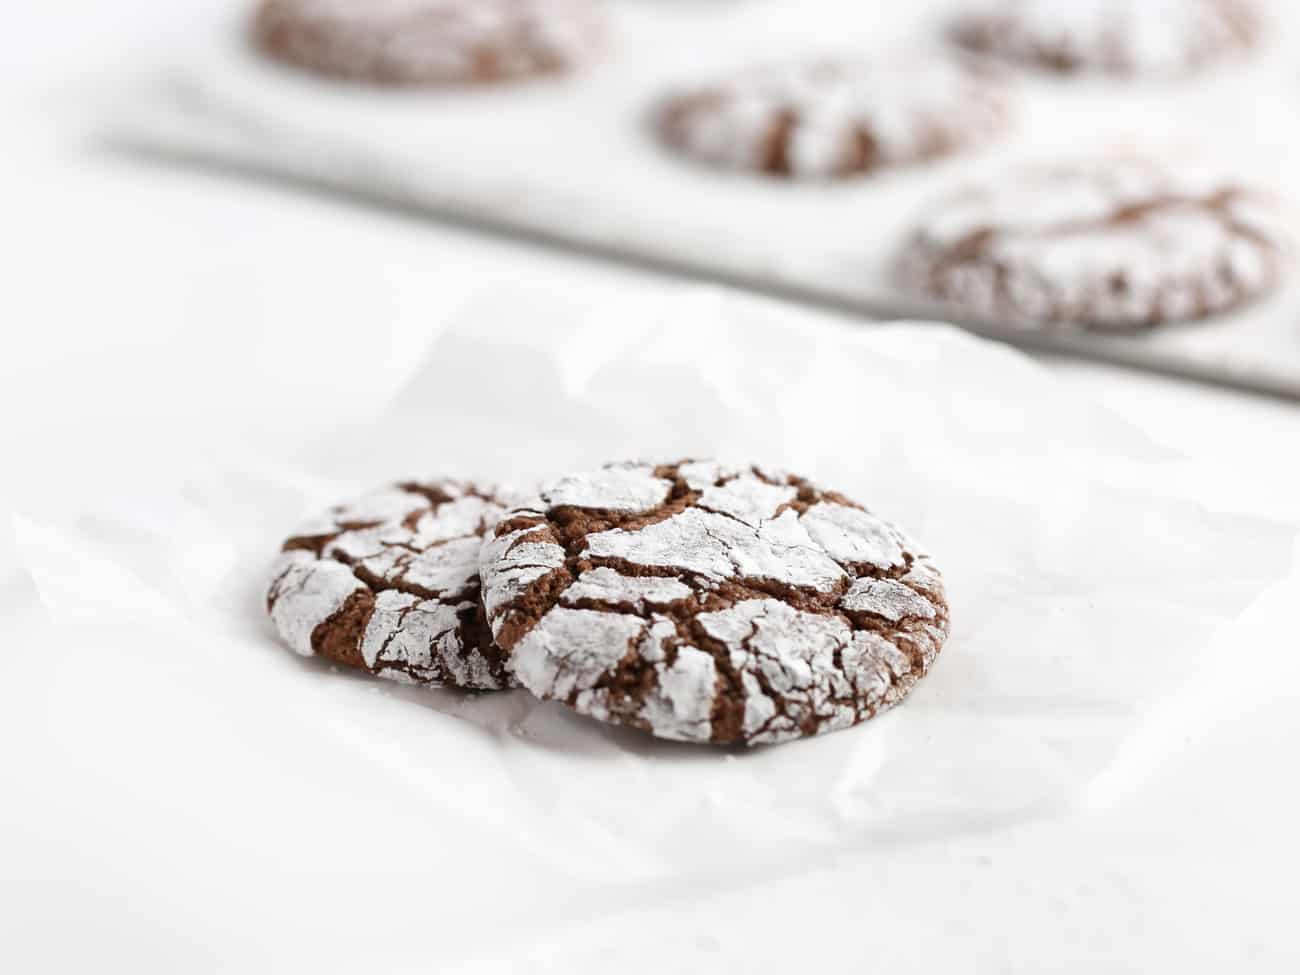 Two crackle top chocolate brownie cookies with baking tray in background.